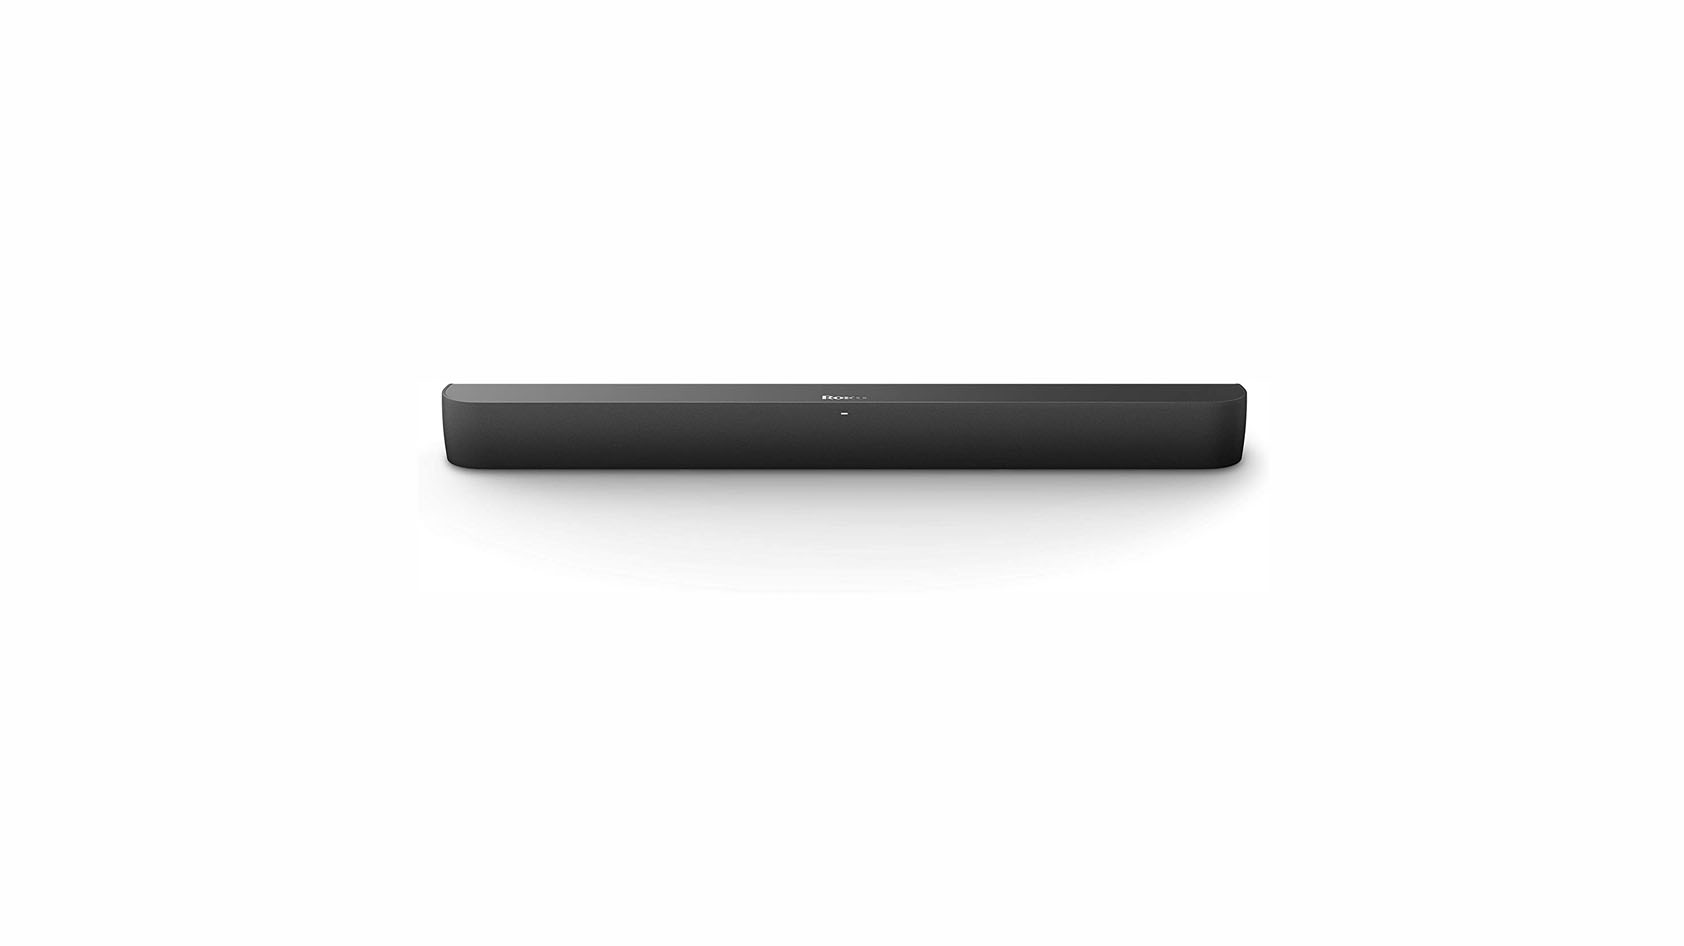 The Roku Streambar Pro in black against a white background.